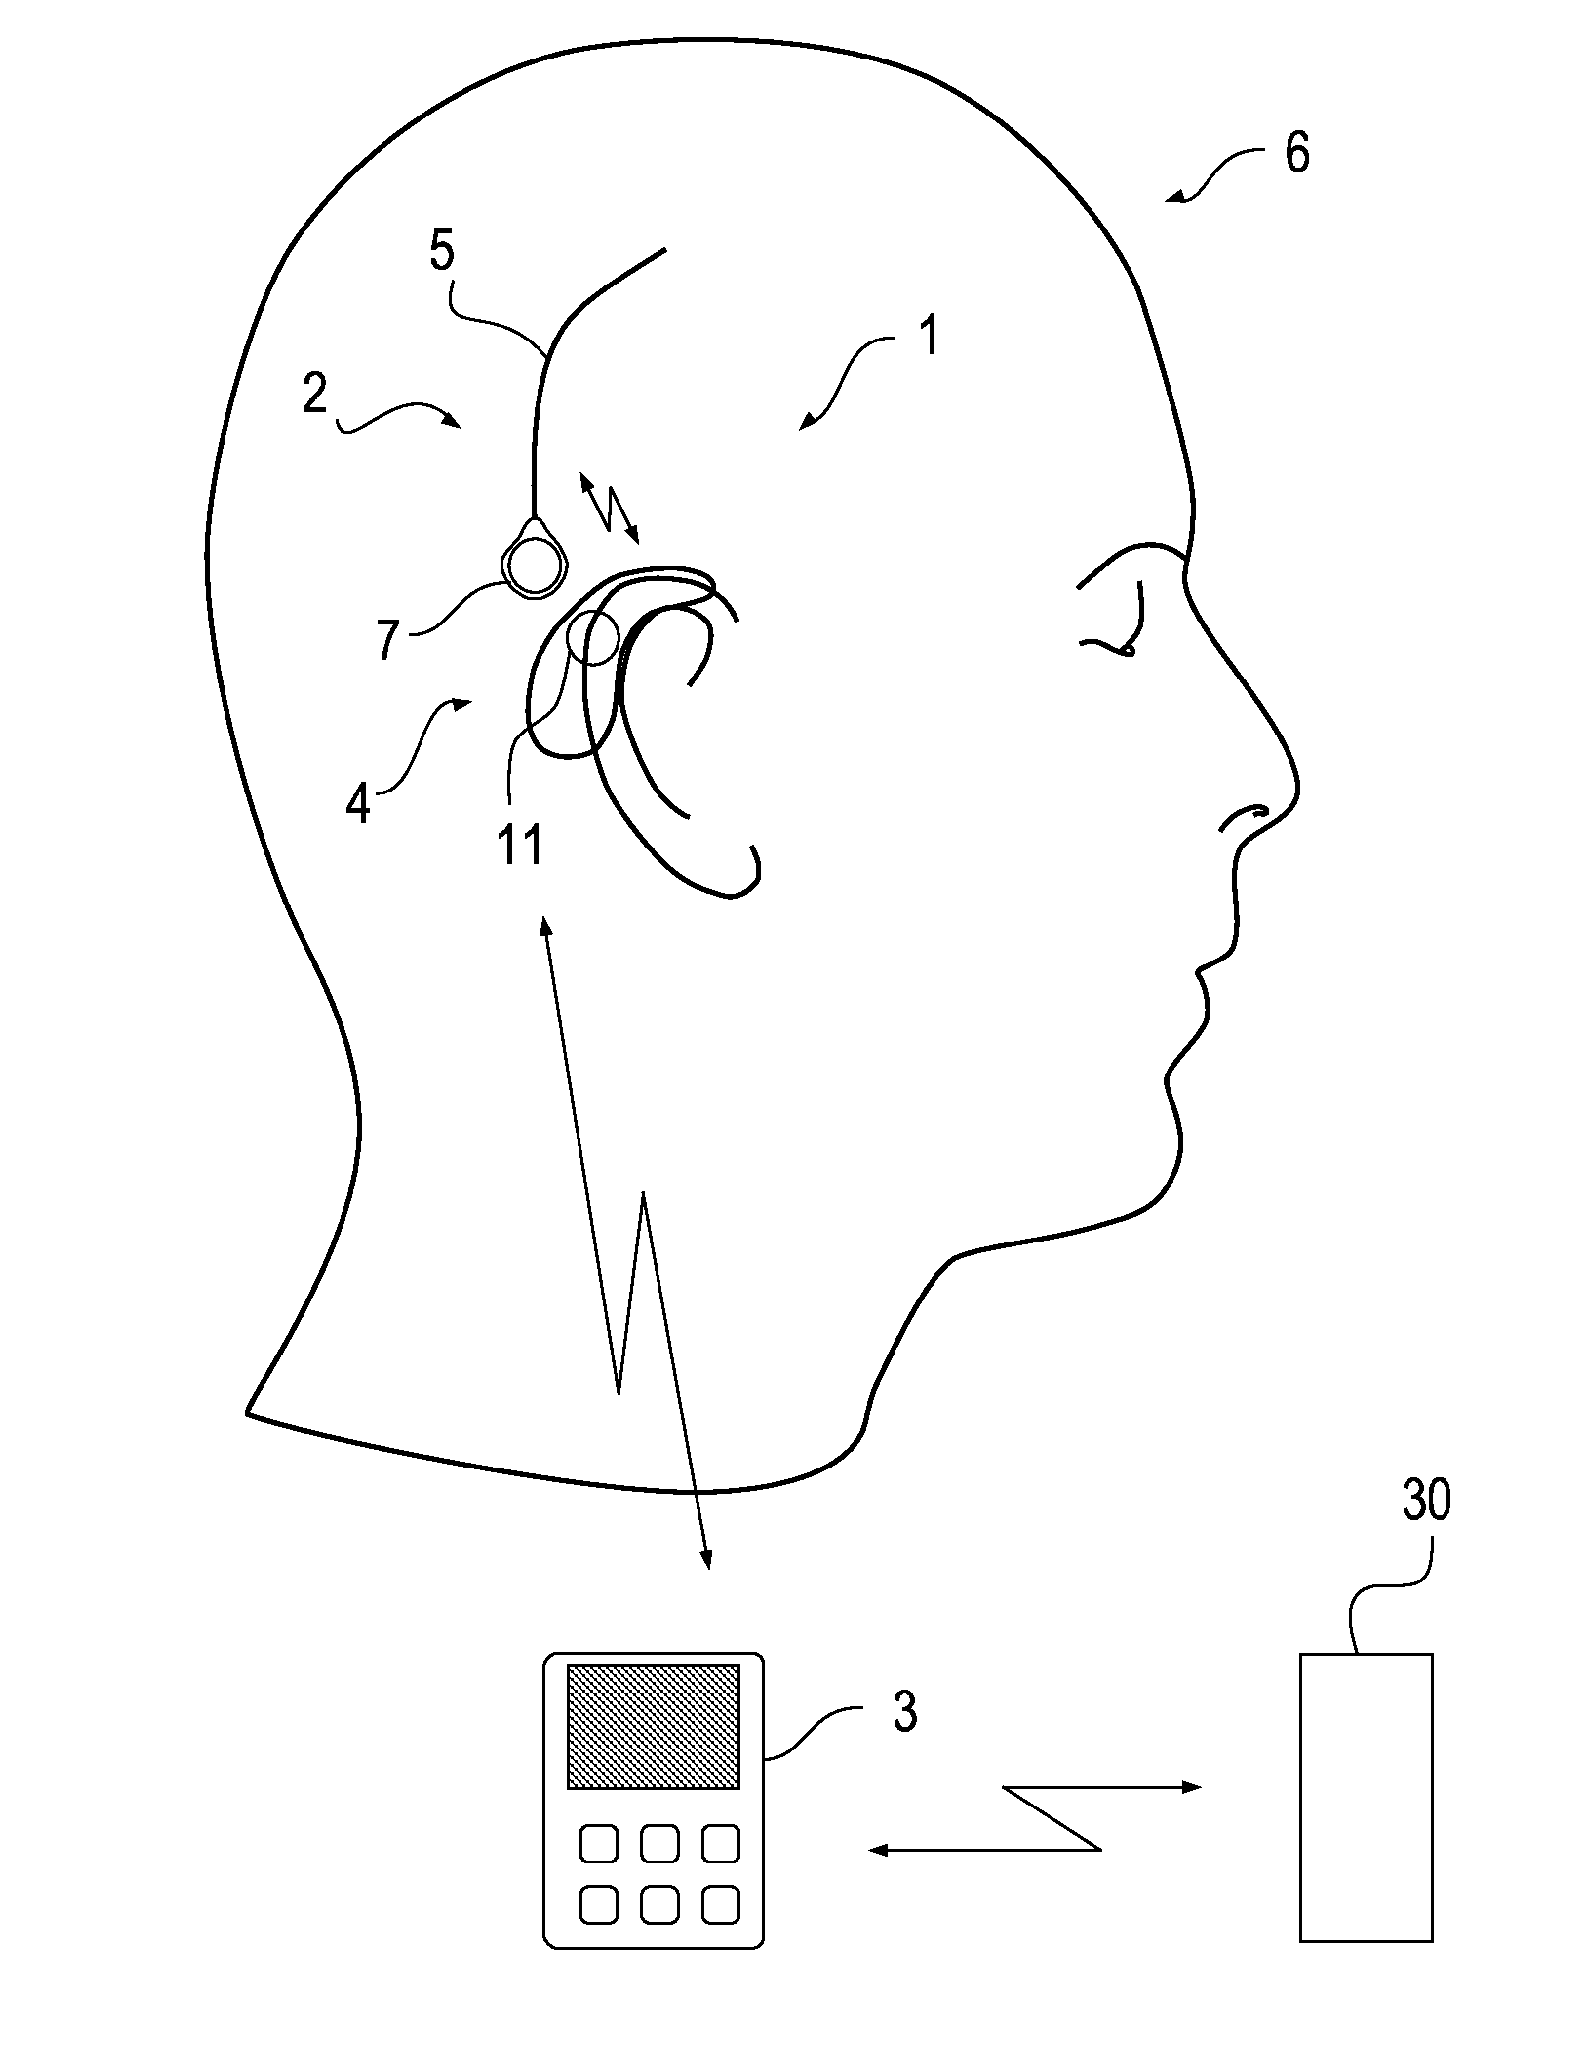 Portable eeg monitor system with wireless communication